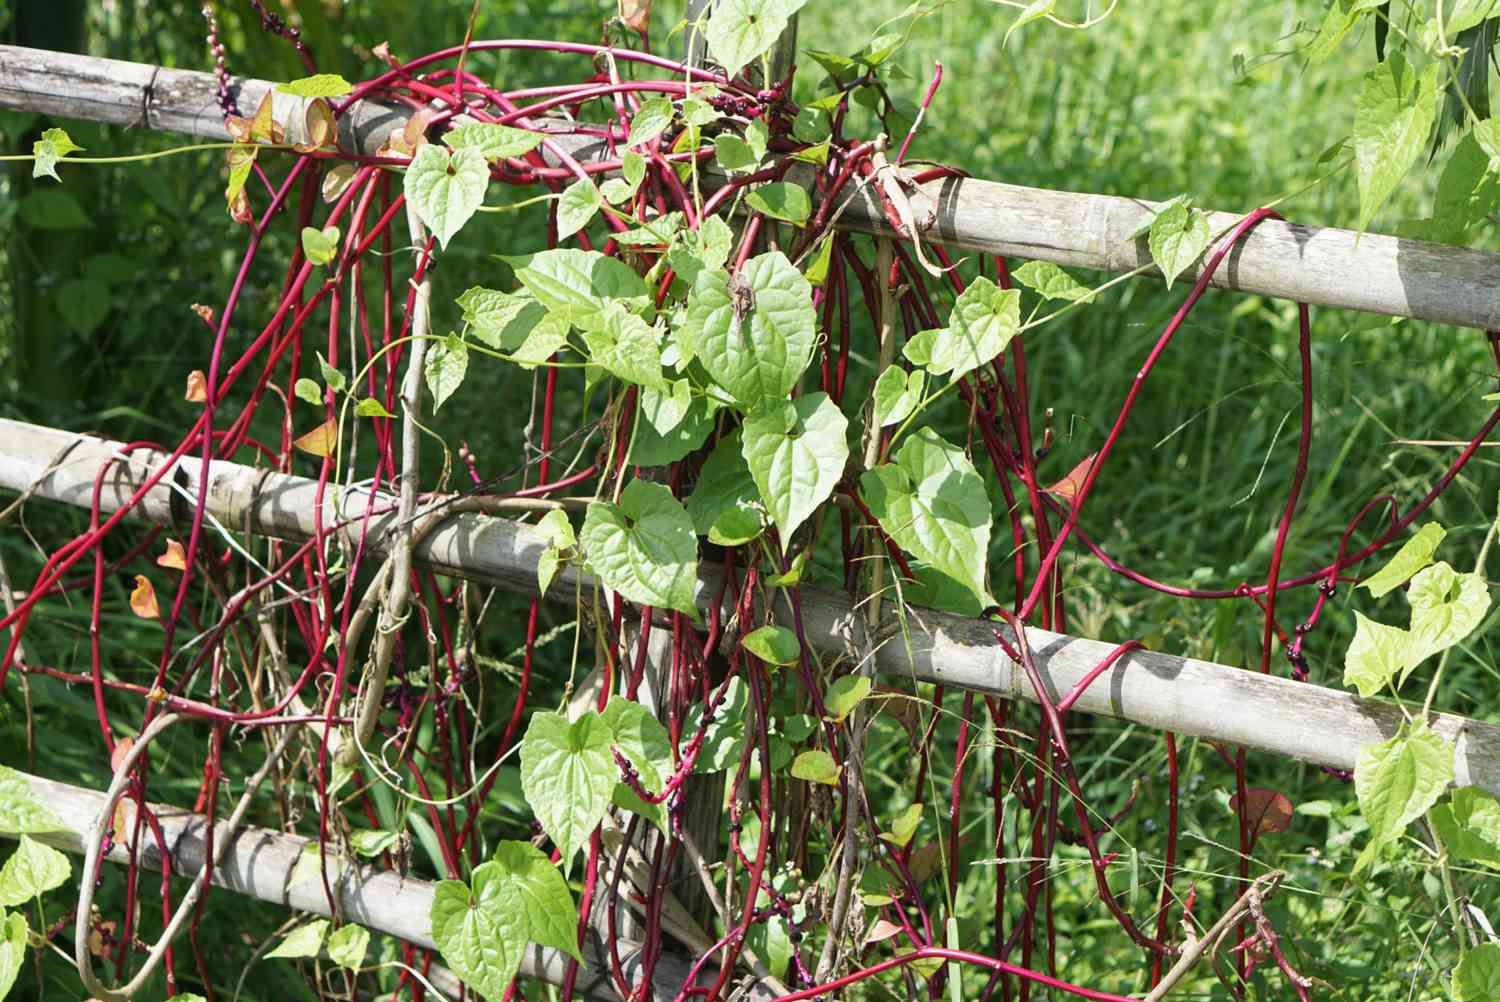 Malabar spinach wrapped around wooden fence posts in sunlight